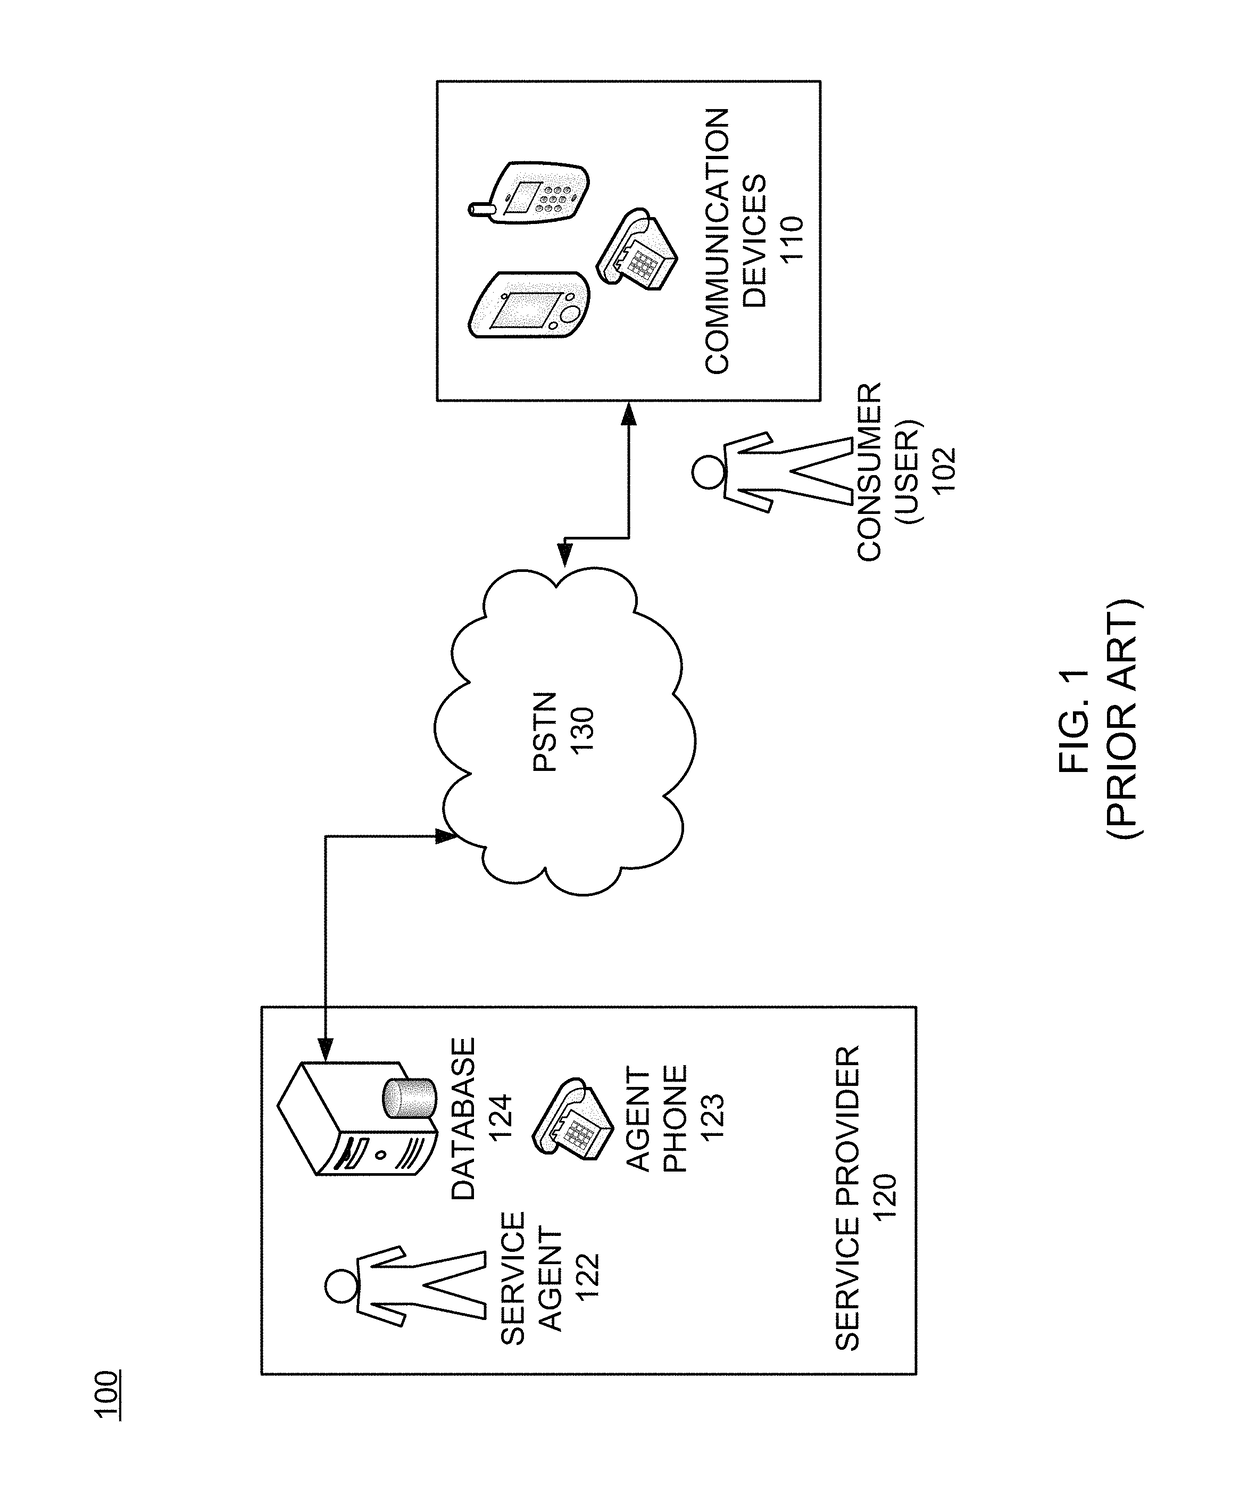 Multimode service communication configuration for performing transactions